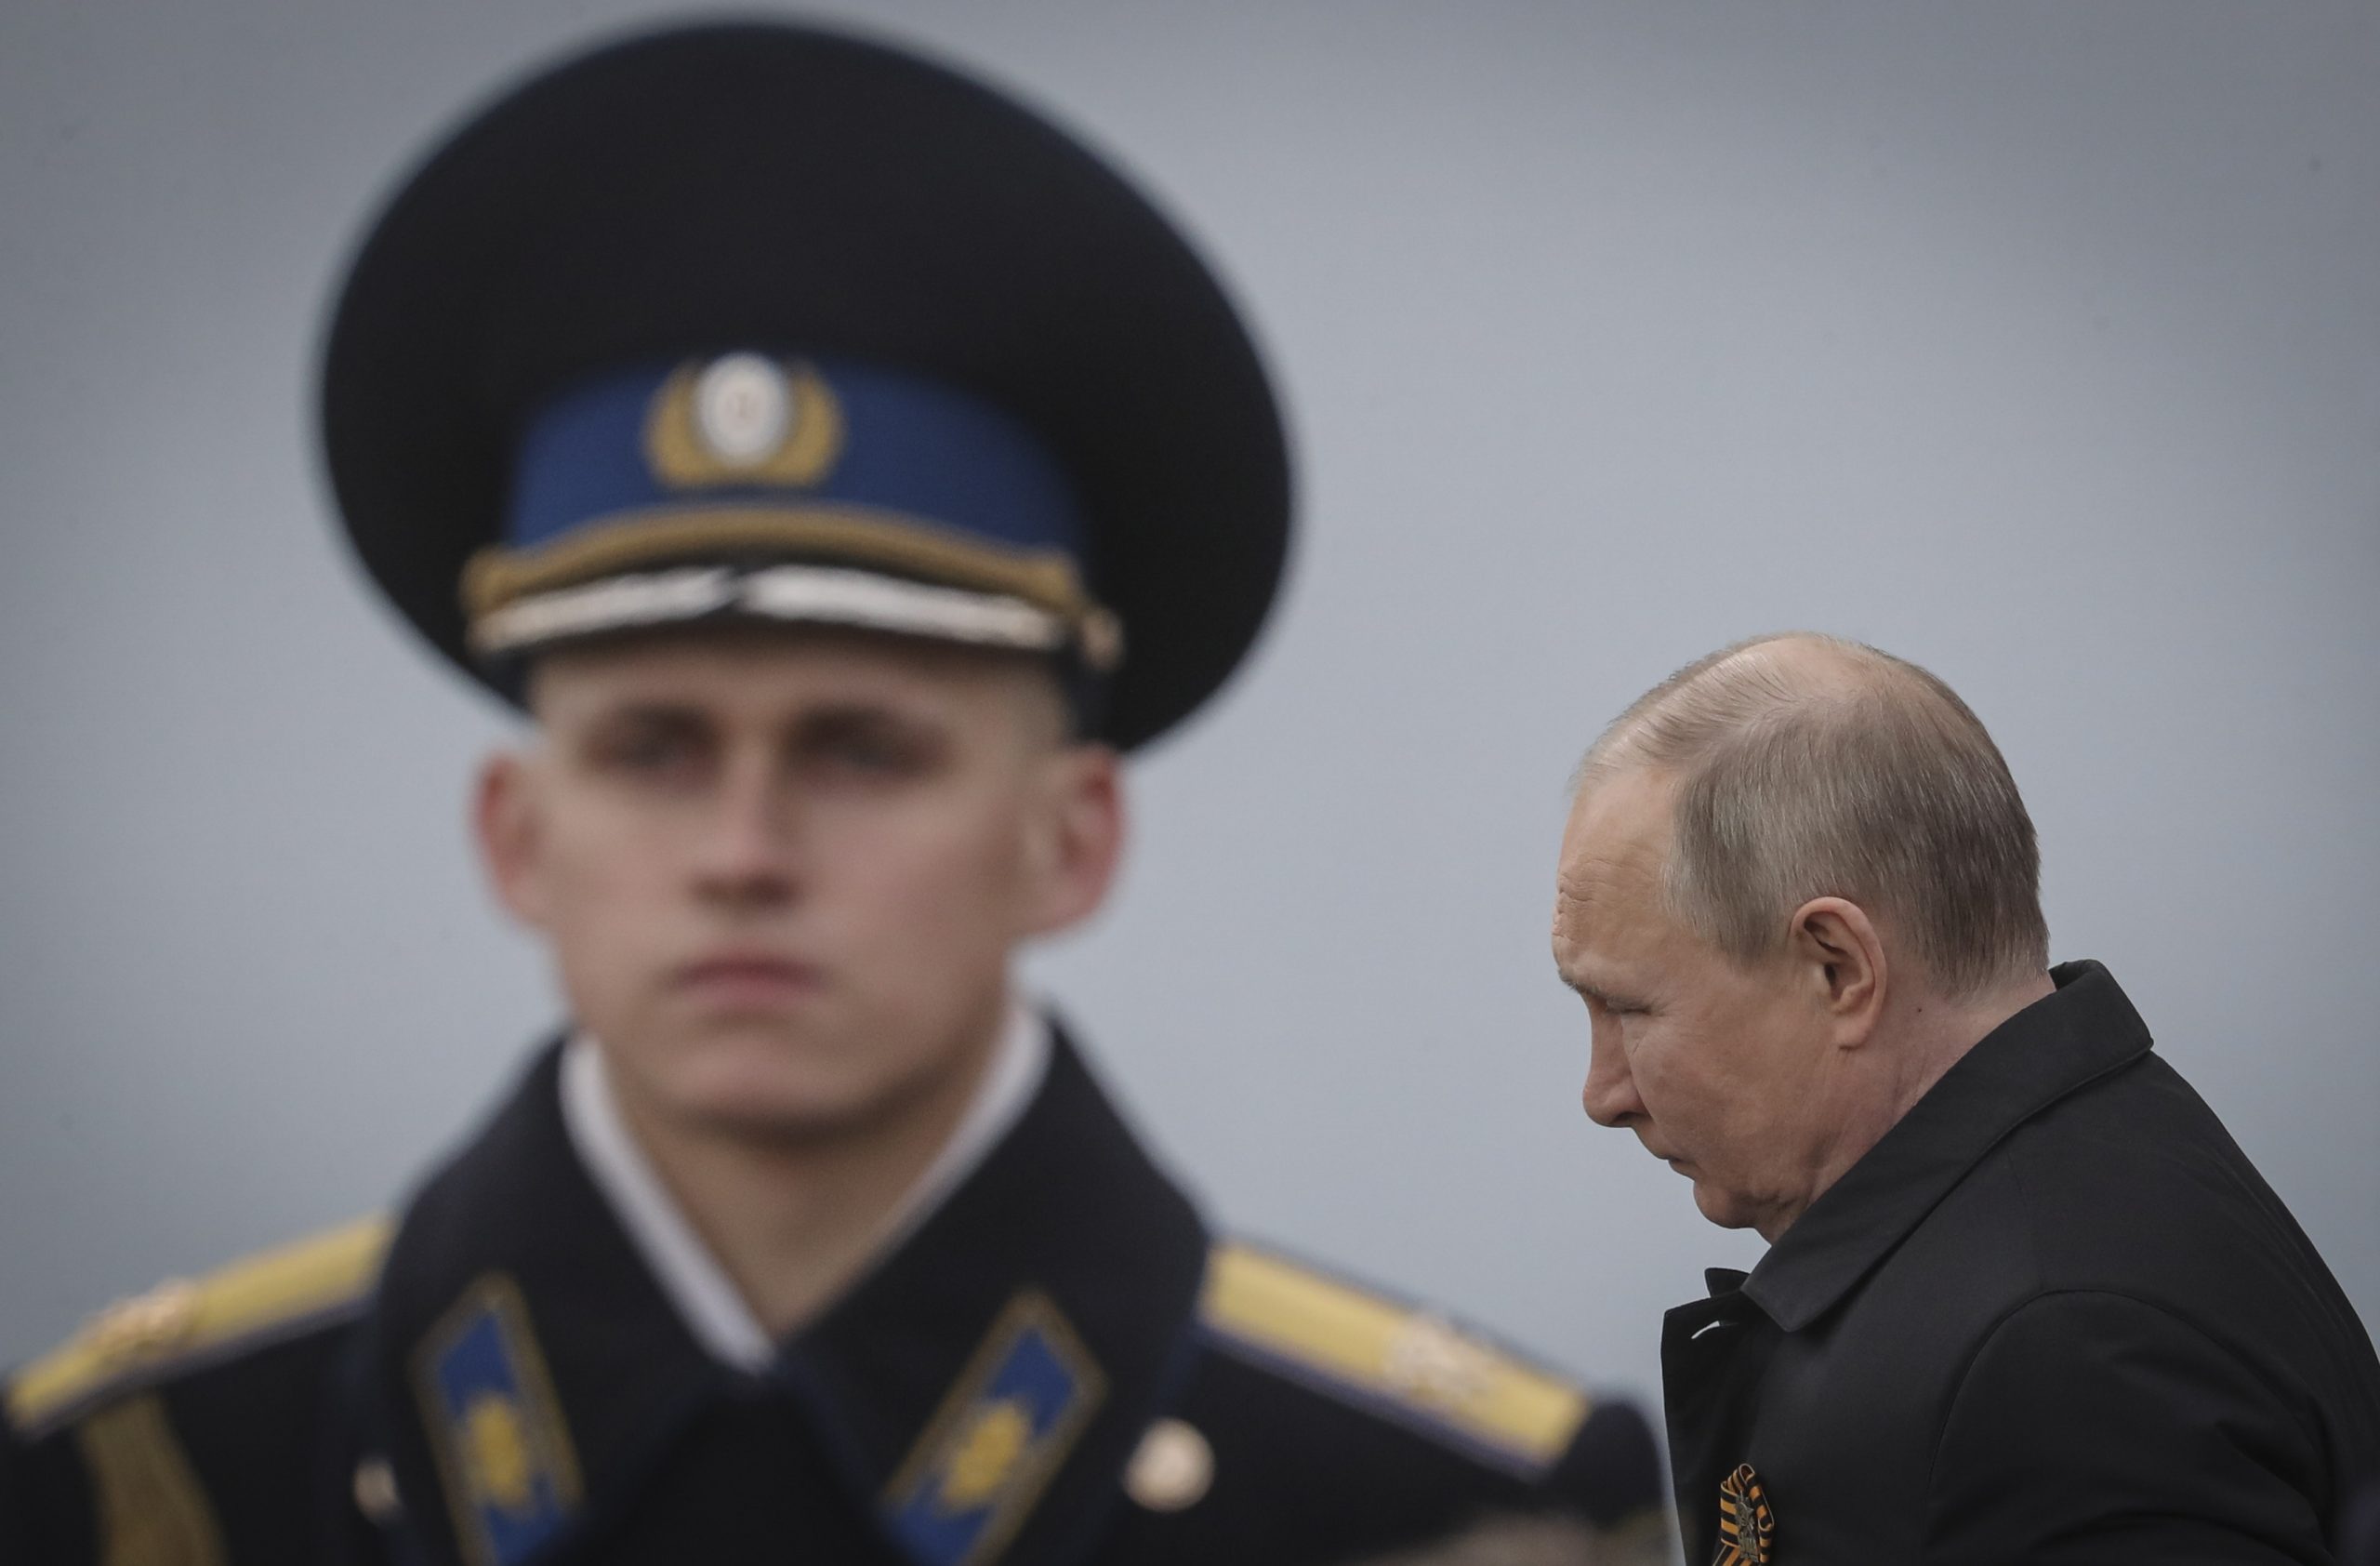 epaselect epa09991206 (FILE) - Russian President Vladimir Putin enters the Red Square to attend the Victory Day military parade in Moscow, Russia, 09 May 2022 (reissued 03 June 2022). 04 June 2022 marks 100 days since on 24 February 2022 Russian troops invaded Ukrainian territory in what the Russian president declared a "Special Military Operation", starting an armed conflict that has provoked destruction and a humanitarian crisis. According to the UNHCR, more than 6.8 million refugees have fled Ukraine, and a further 7.7 million people have been displaced internally within Ukraine since. The Russian invasion was met by Western countries with heavy economic sanctions against Russian companies and individuals, as well as weaponry deliveries and financial support to Ukraine.  EPA/MAXIM SHIPENKOV  ATTENTION: This Image is part of a PHOTO SET *** Local Caption *** 57665895